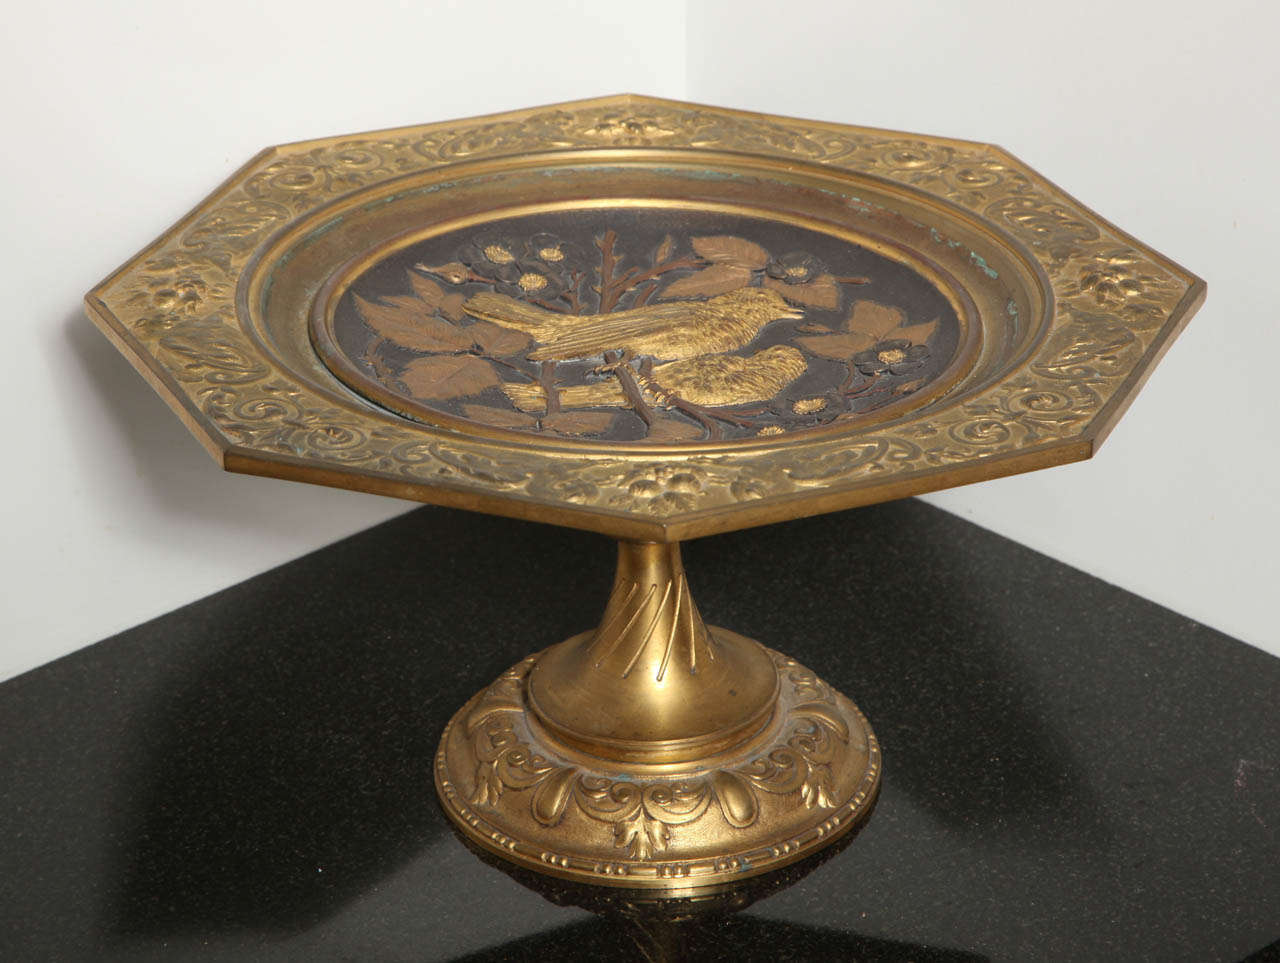 This unique plate in bronze and brass with birds and floral embossed makes this antique superb. It has an octagon shape plate at the top and circular bottom base. The embossed birds are highlighted by the floral design and its dark background.
The